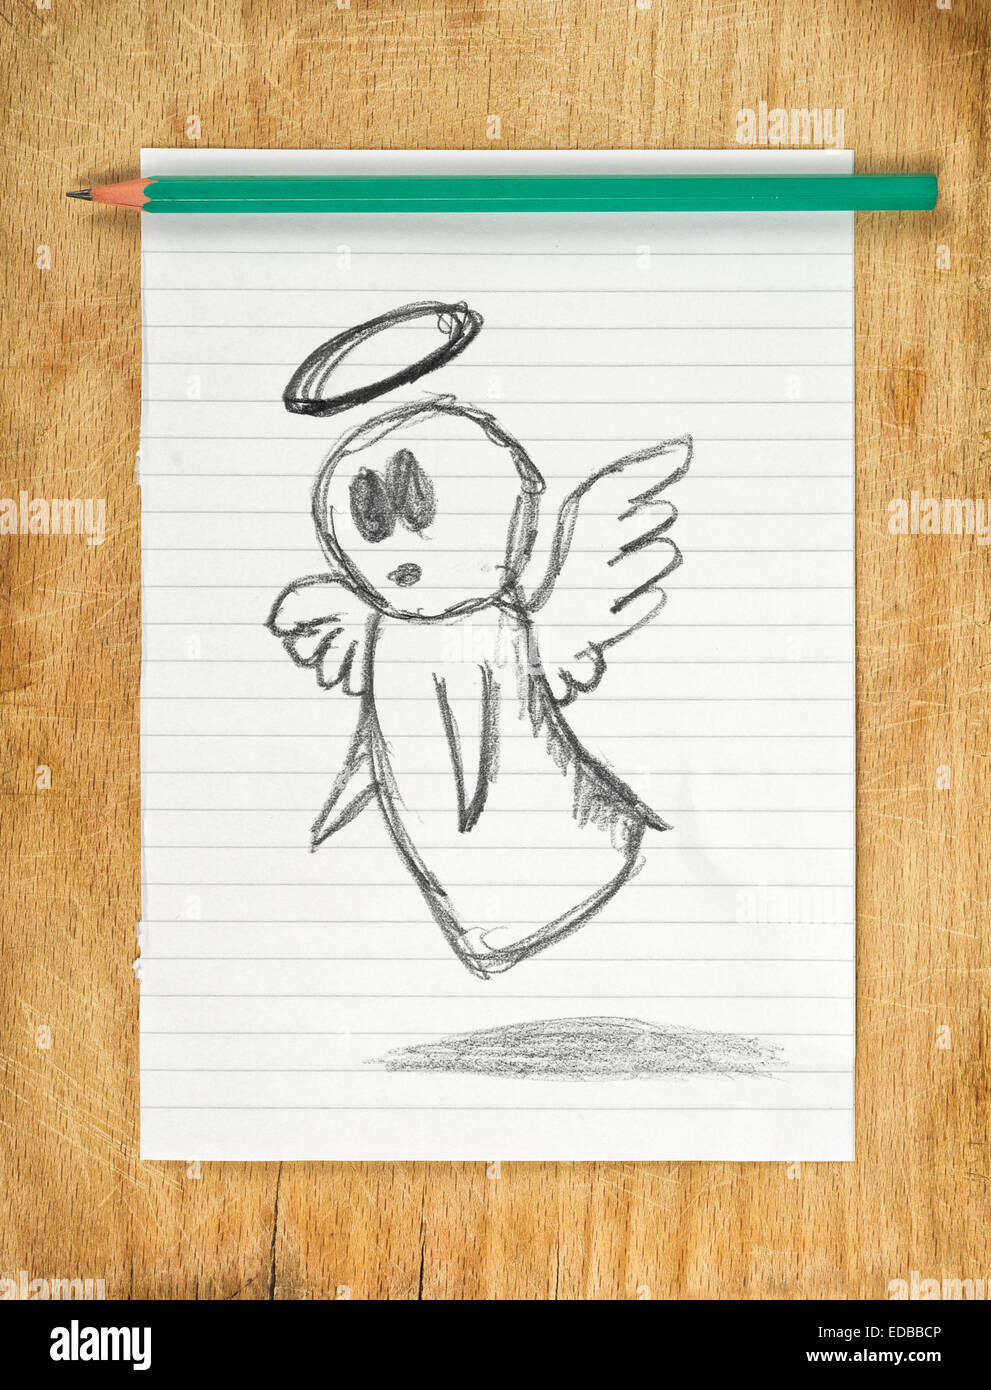 Doodle drawing of angel on white paper with pencil, moralizer concept. Stock Photo